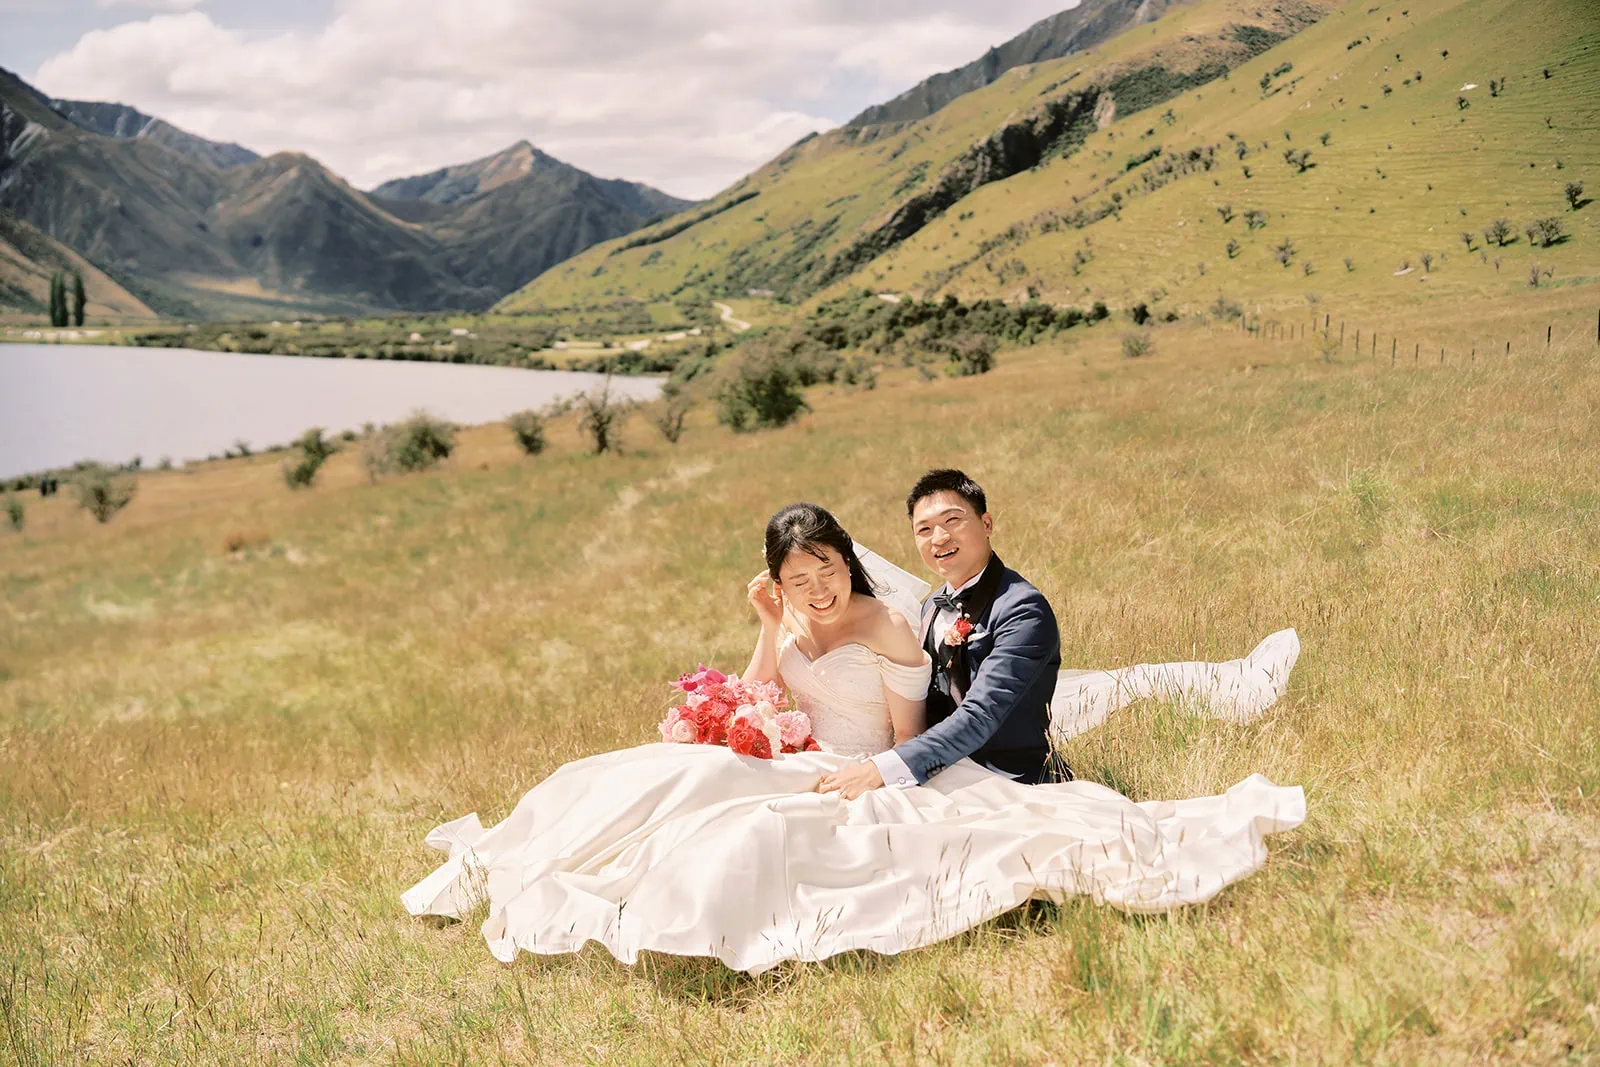 Queenstown Elopement Heli Wedding Photographer クイーンズタウン結婚式 | A couple enjoying a pre-wedding photoshoot in a picturesque field, with stunning mountains forming the mesmerizing backdrop.